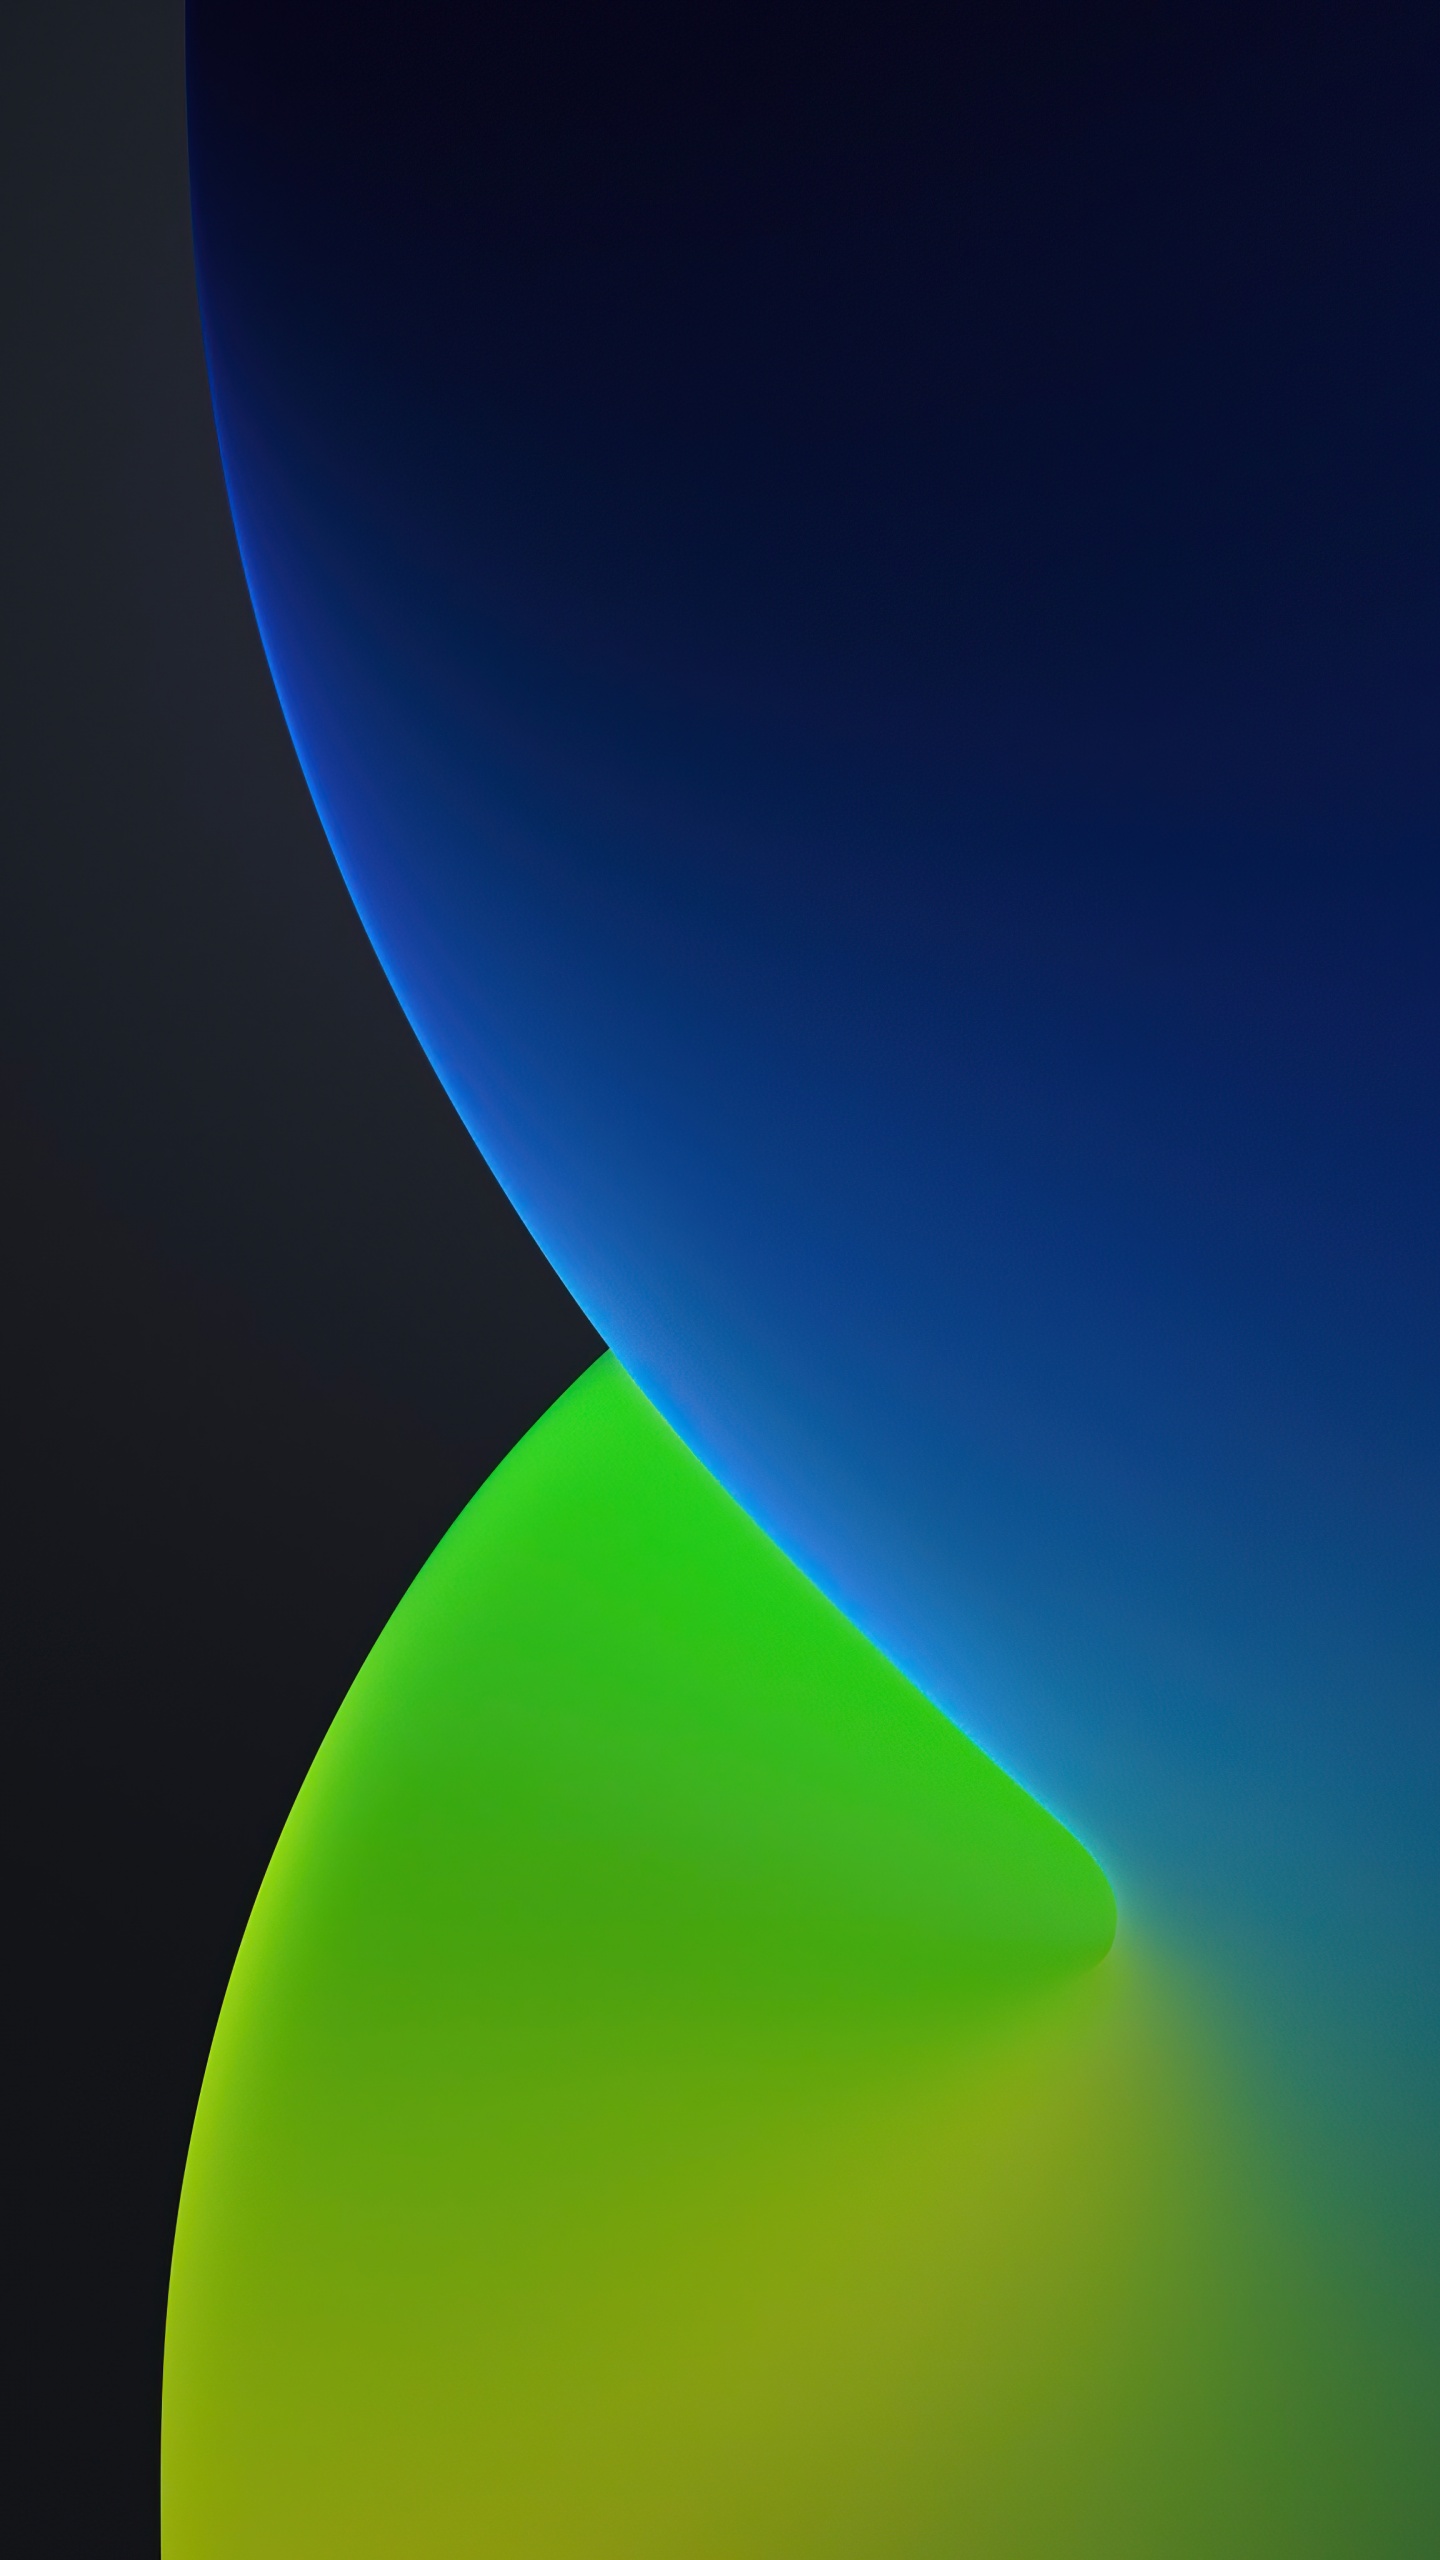 200+] Ios 13 Background s | Wallpapers.com